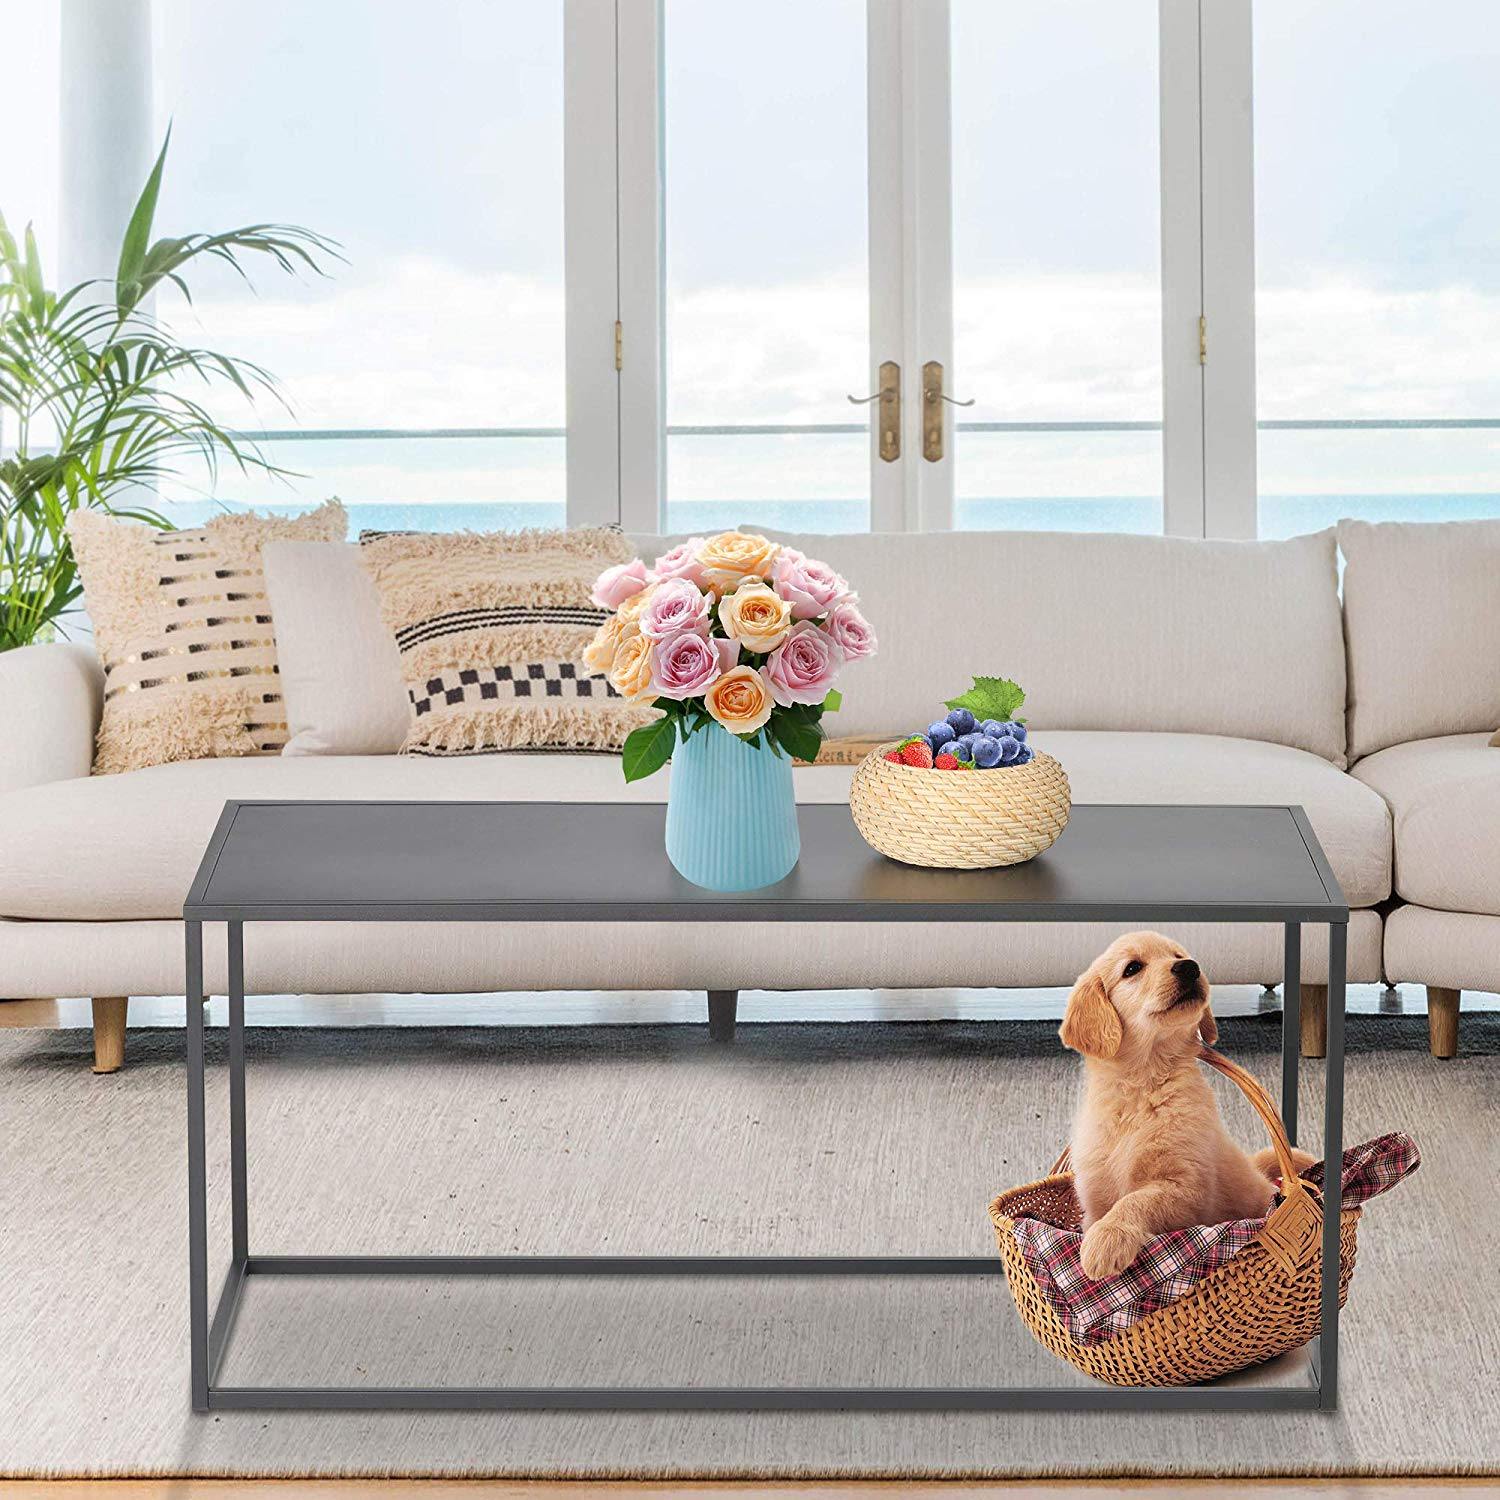 Simple Coffee Table with Anti-Scratch Design Premium Rust Resistant Industrial Cocktail Table for Living Room Black - Bosonshop